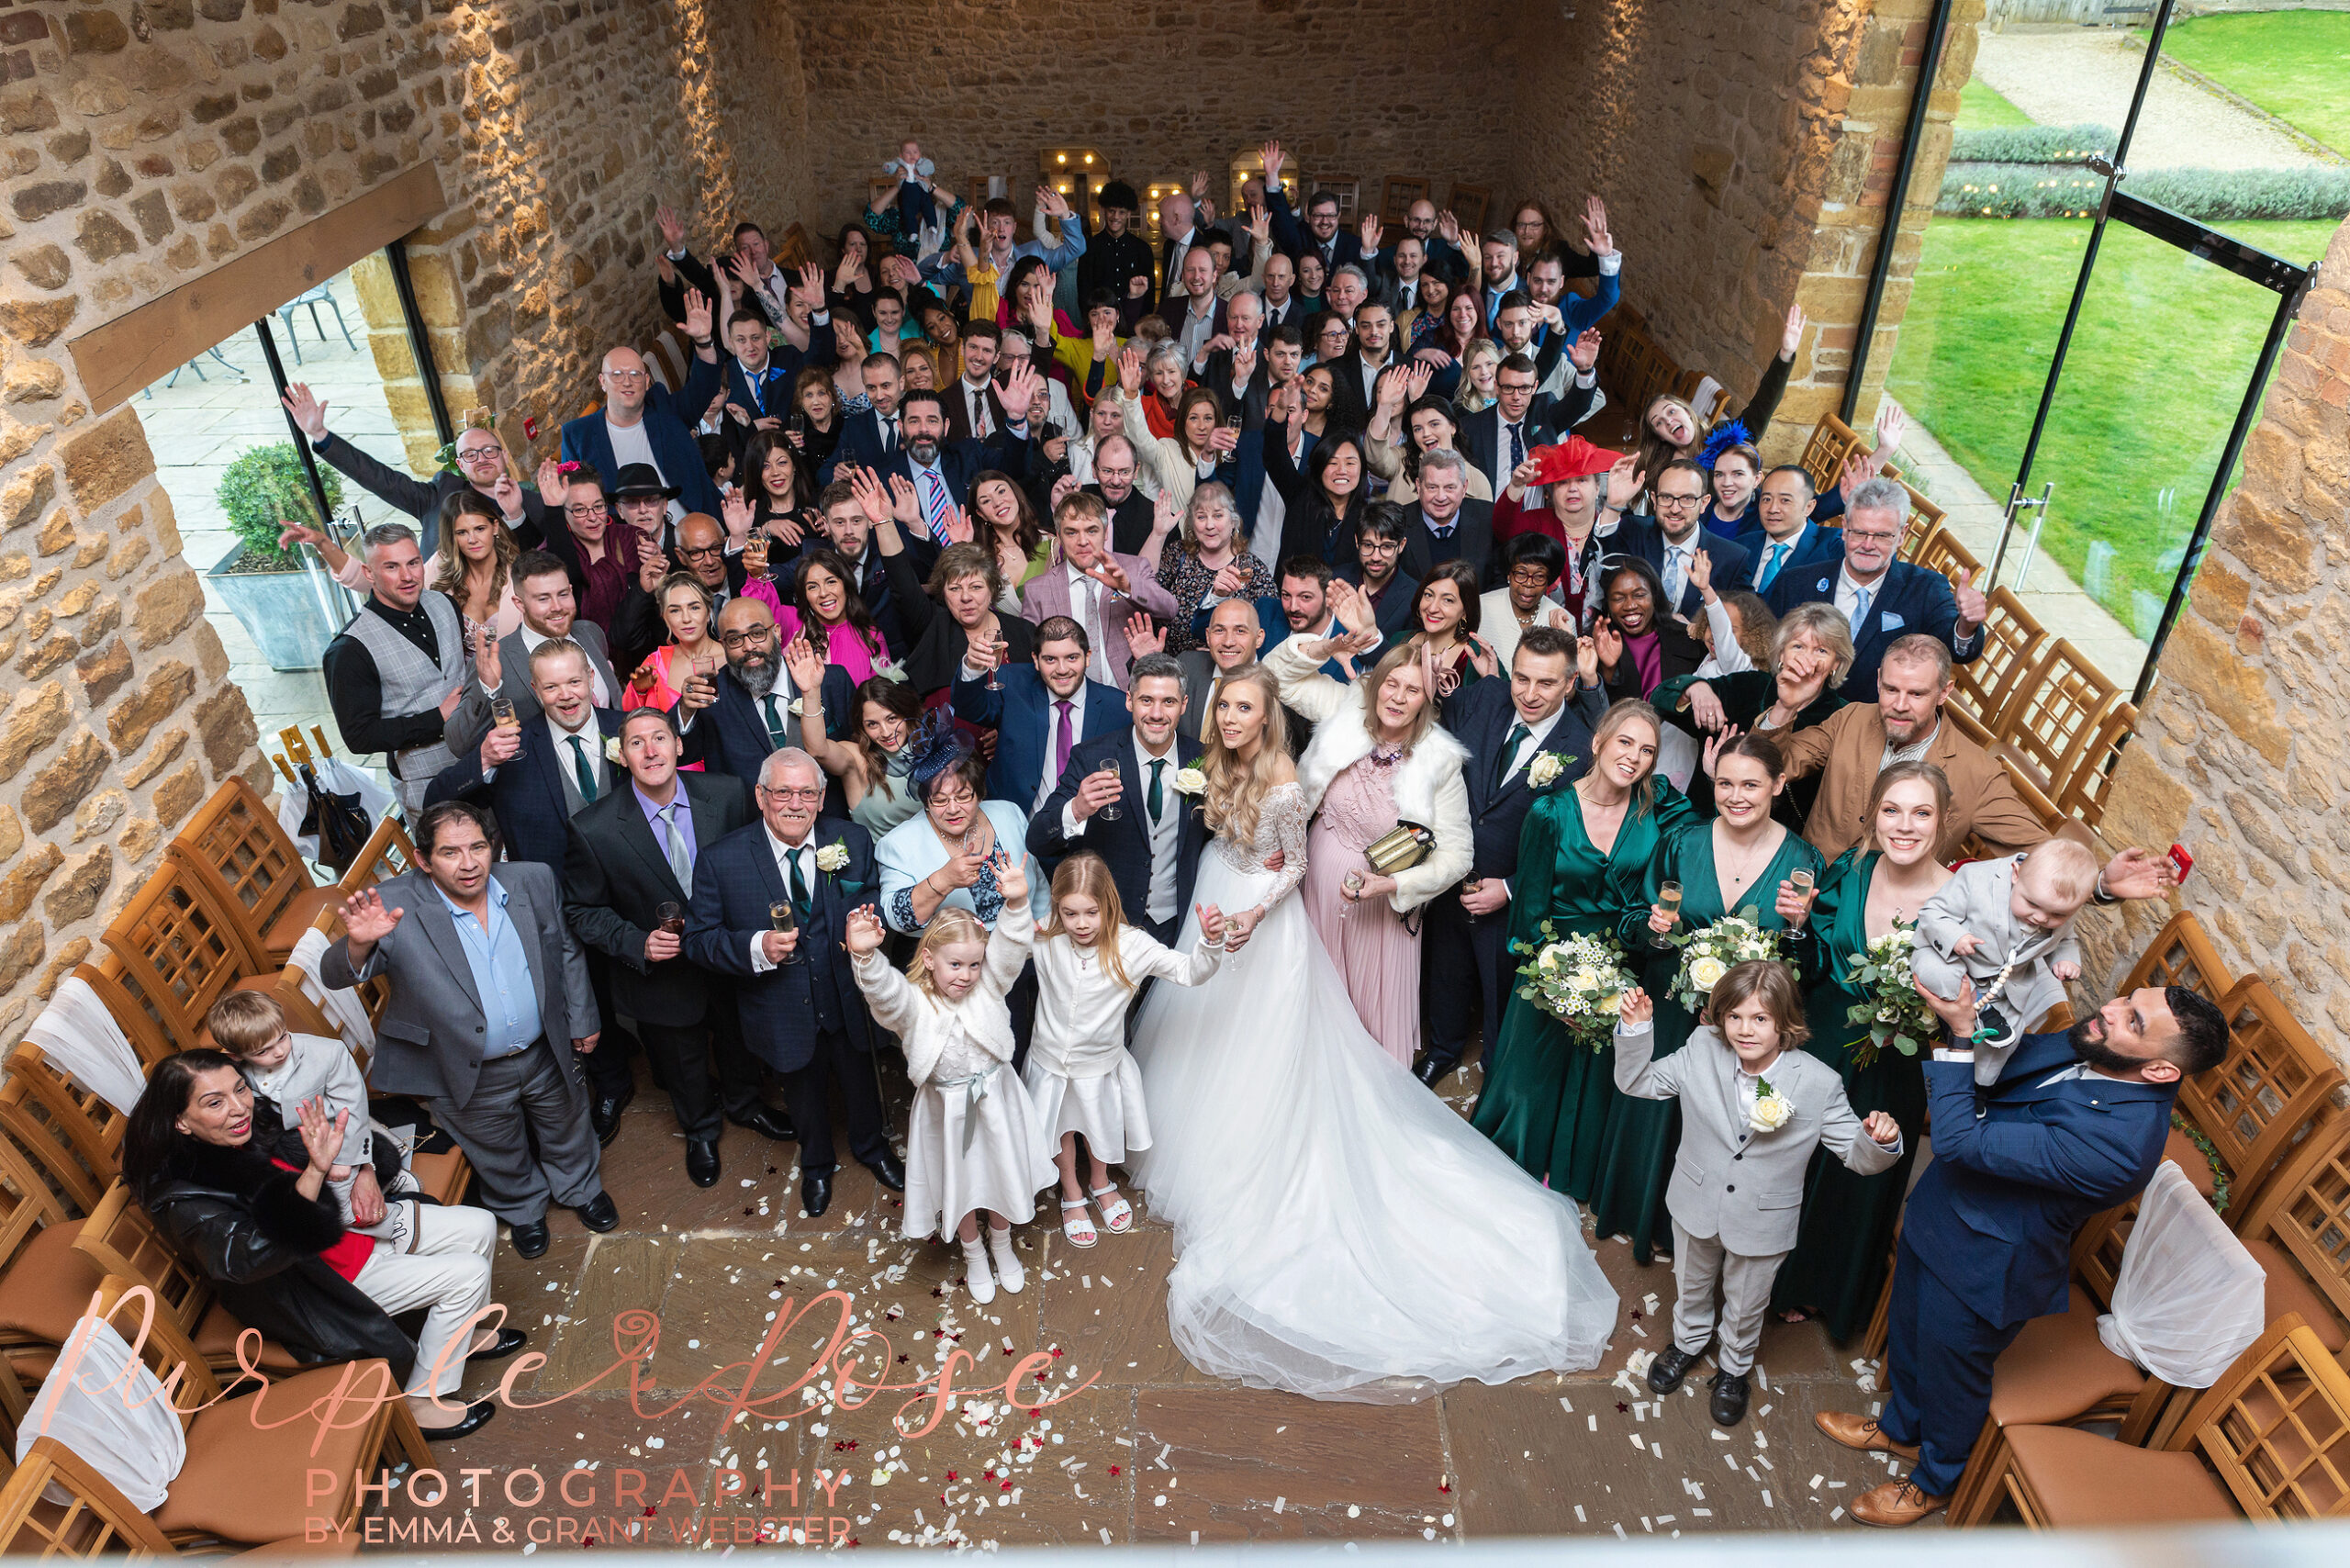 Arieal photo of bride and groom with all their weding guests at a wedding in MIlton Keynes